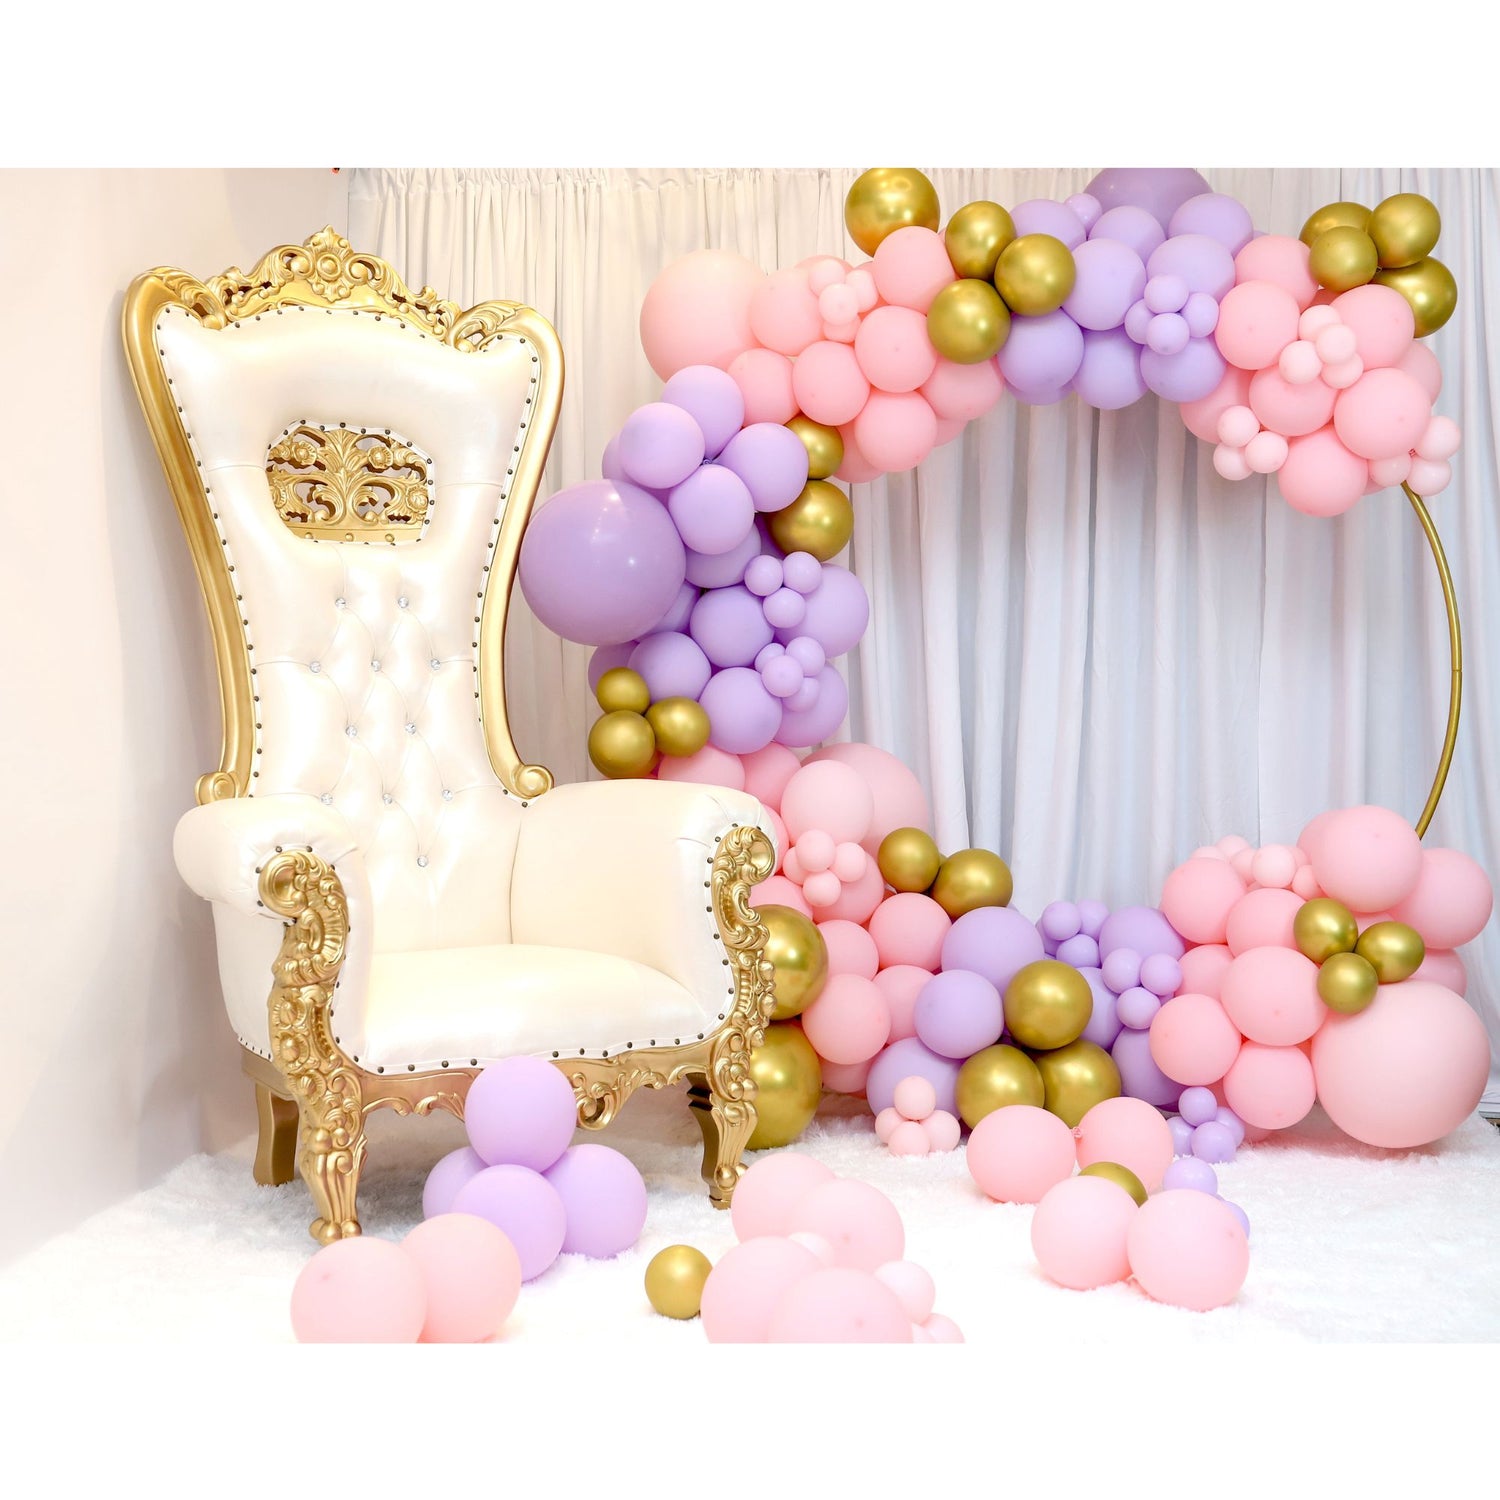 Throne chair with pink, purple and gold balloons on a circle hoop